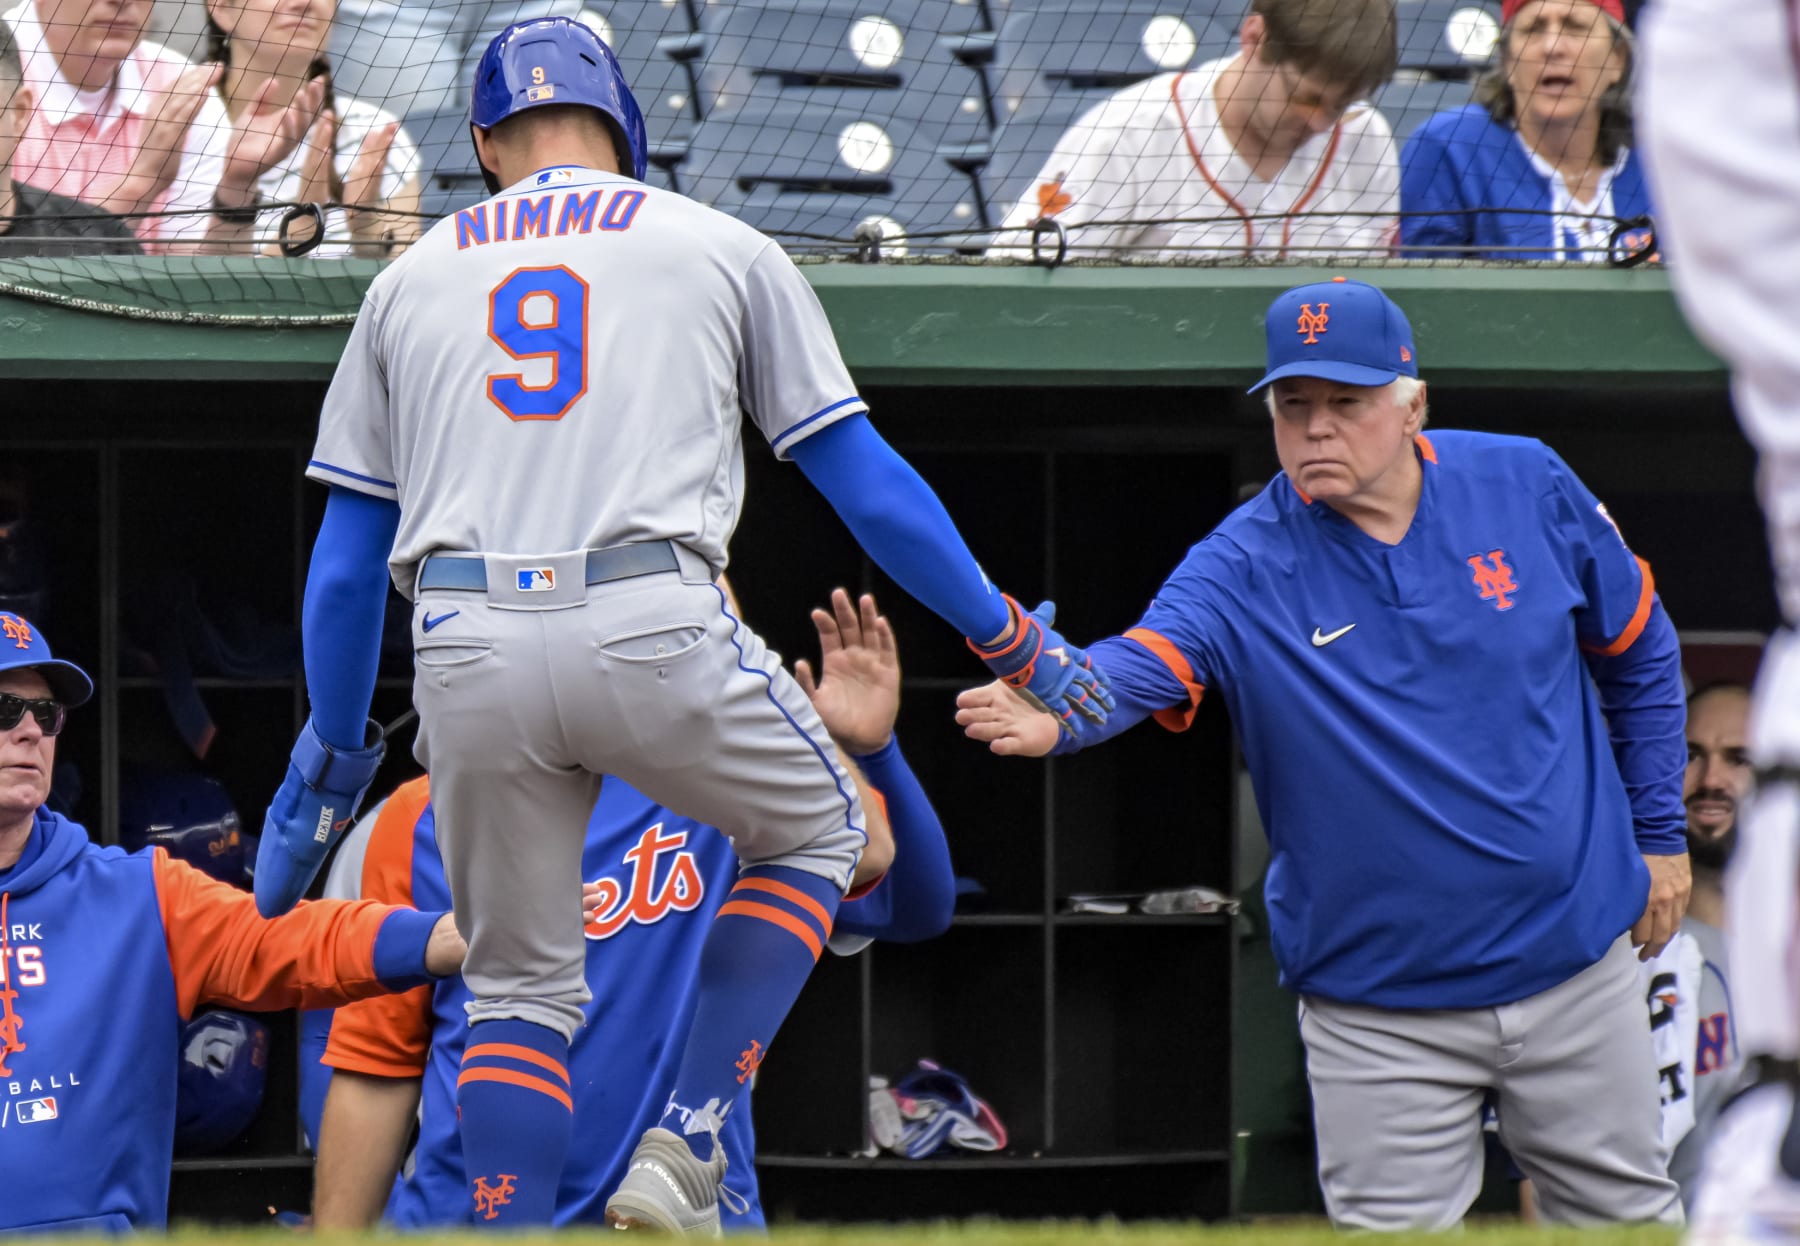 Players Of The Week: Nimmo and Leone Pull Through - Metsmerized Online